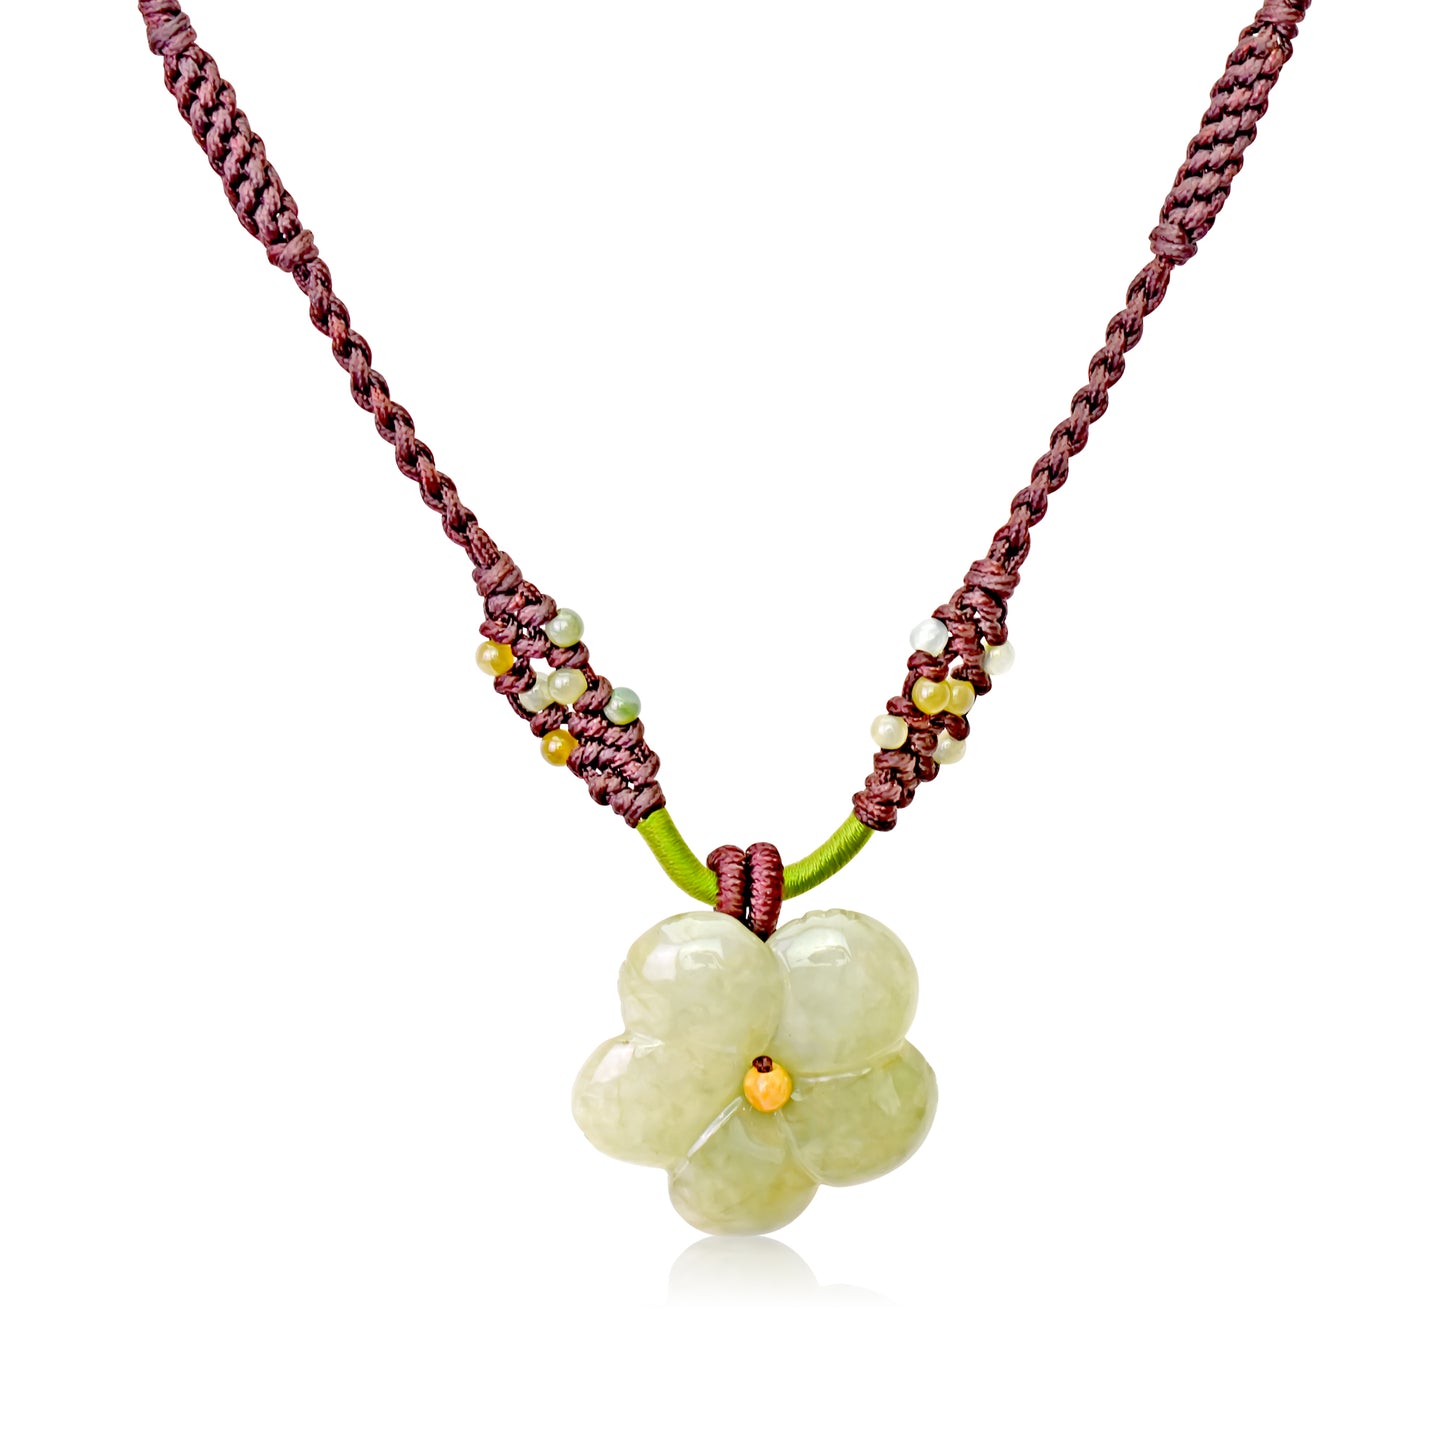 Get the Look You Crave with the Clematis Blossom Jade Necklace with Brown Cord